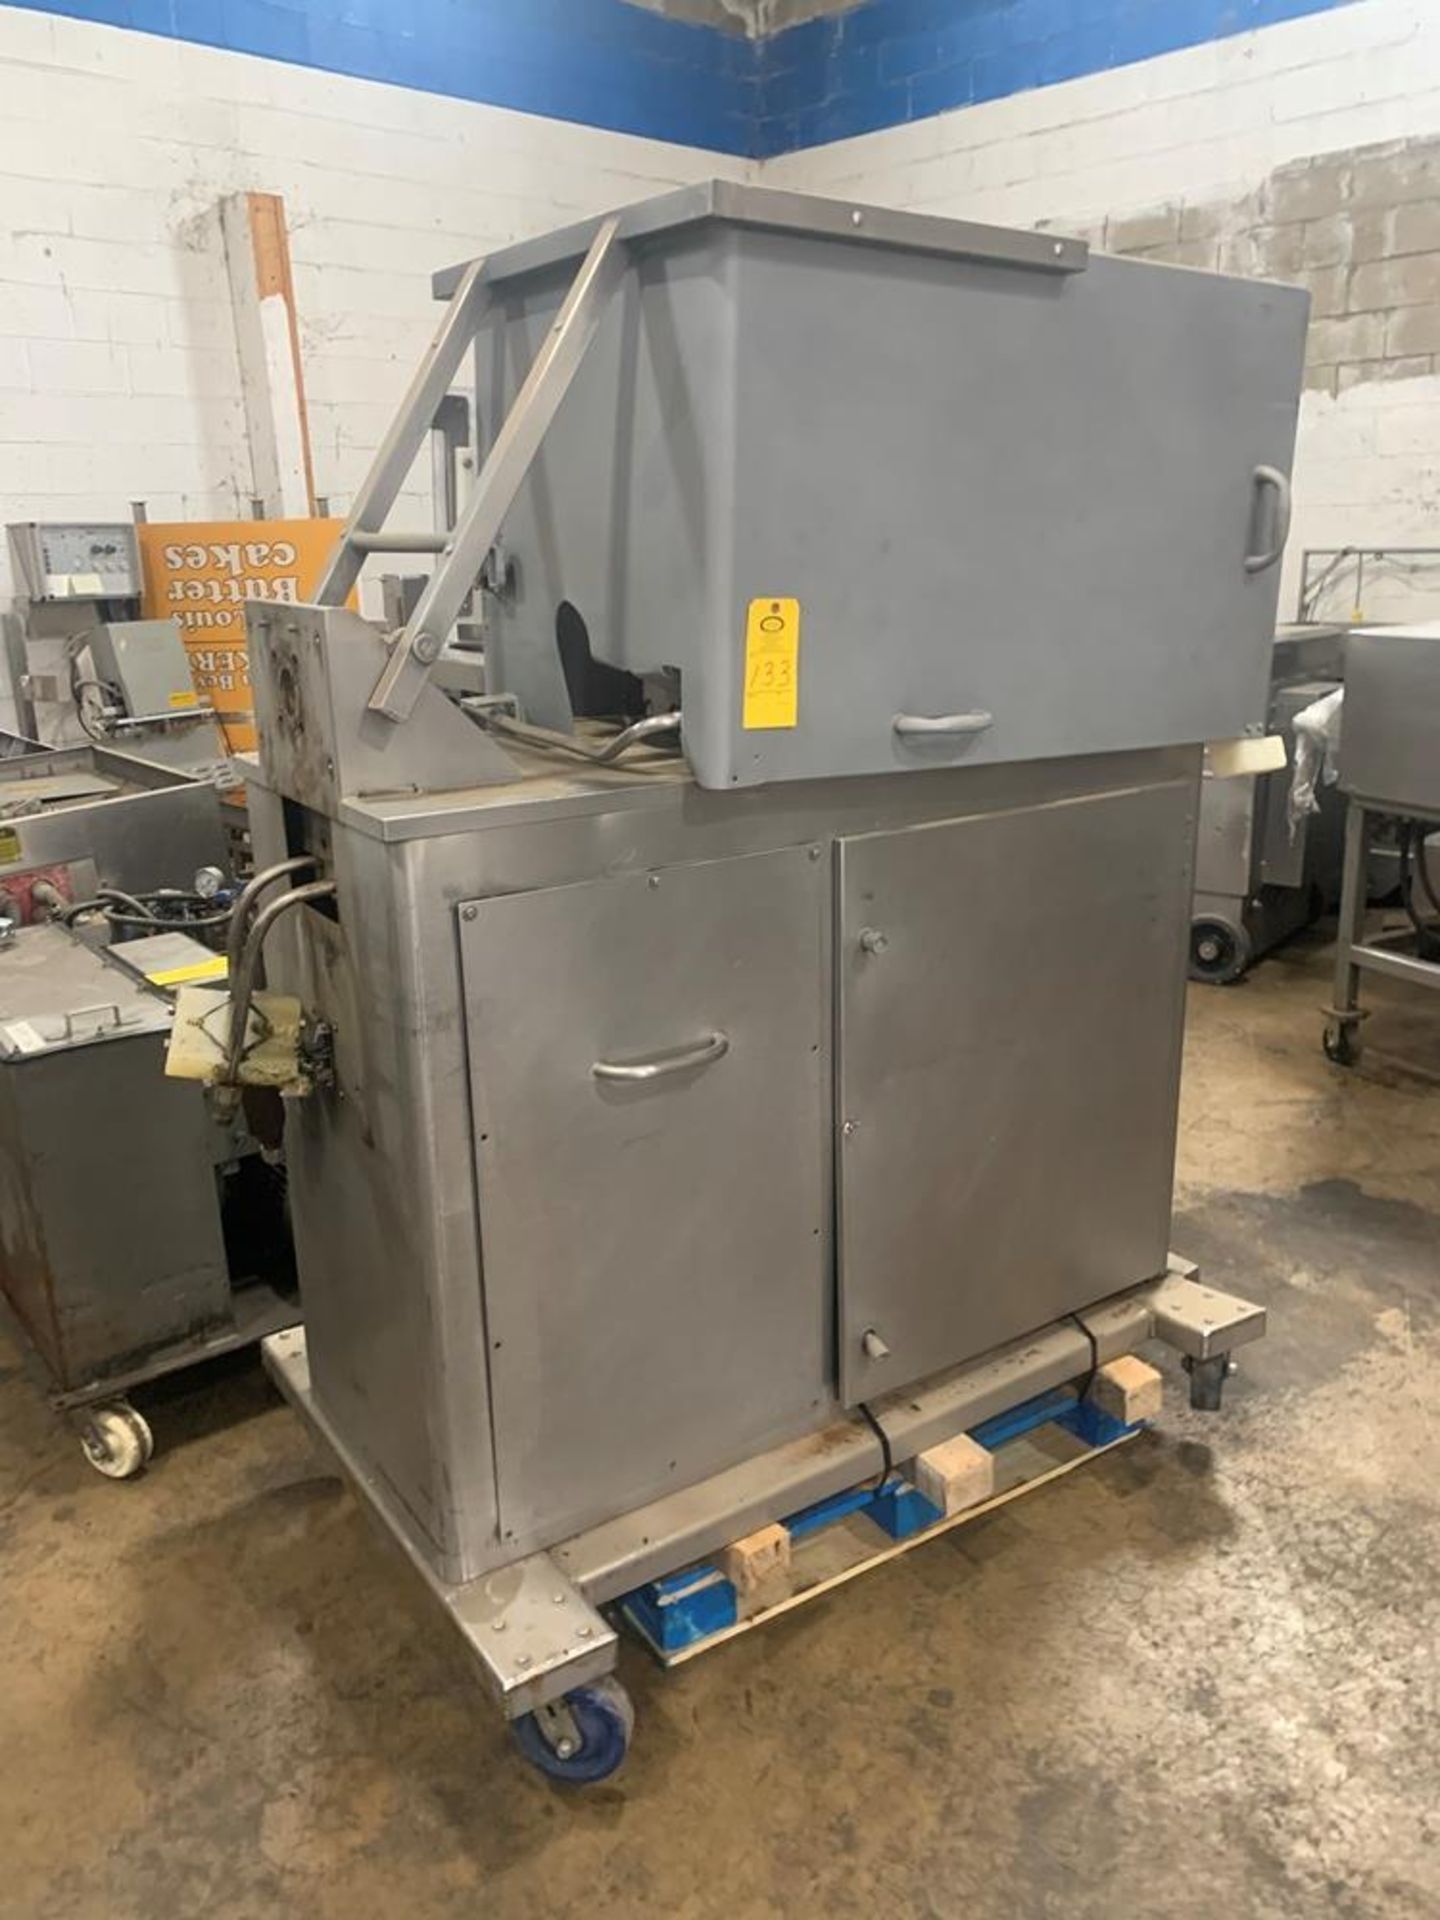 Bettcher Mdl. 75 Press with power pack for parts (Located in Plano, IL) - Image 2 of 11